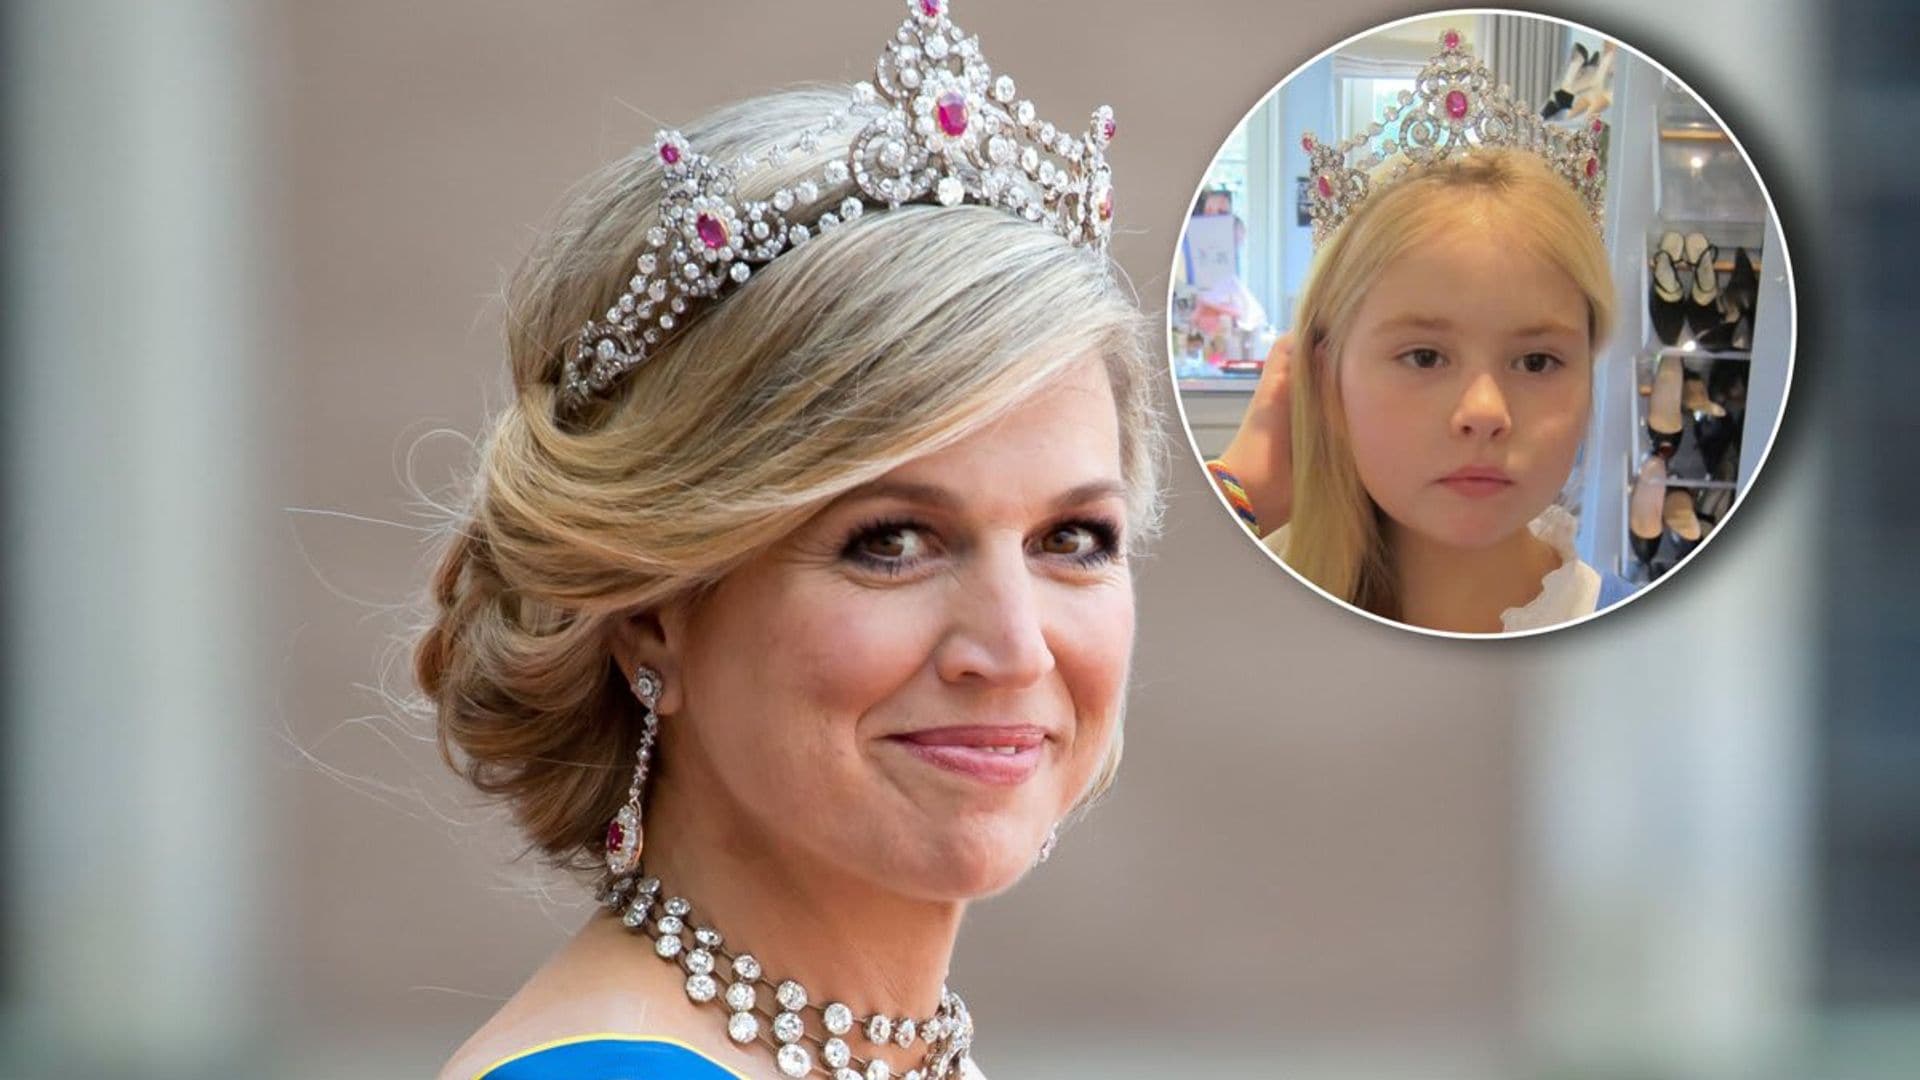 Queen Maxima's daughter loves tiaras: See a photo of her as a little girl wearing one